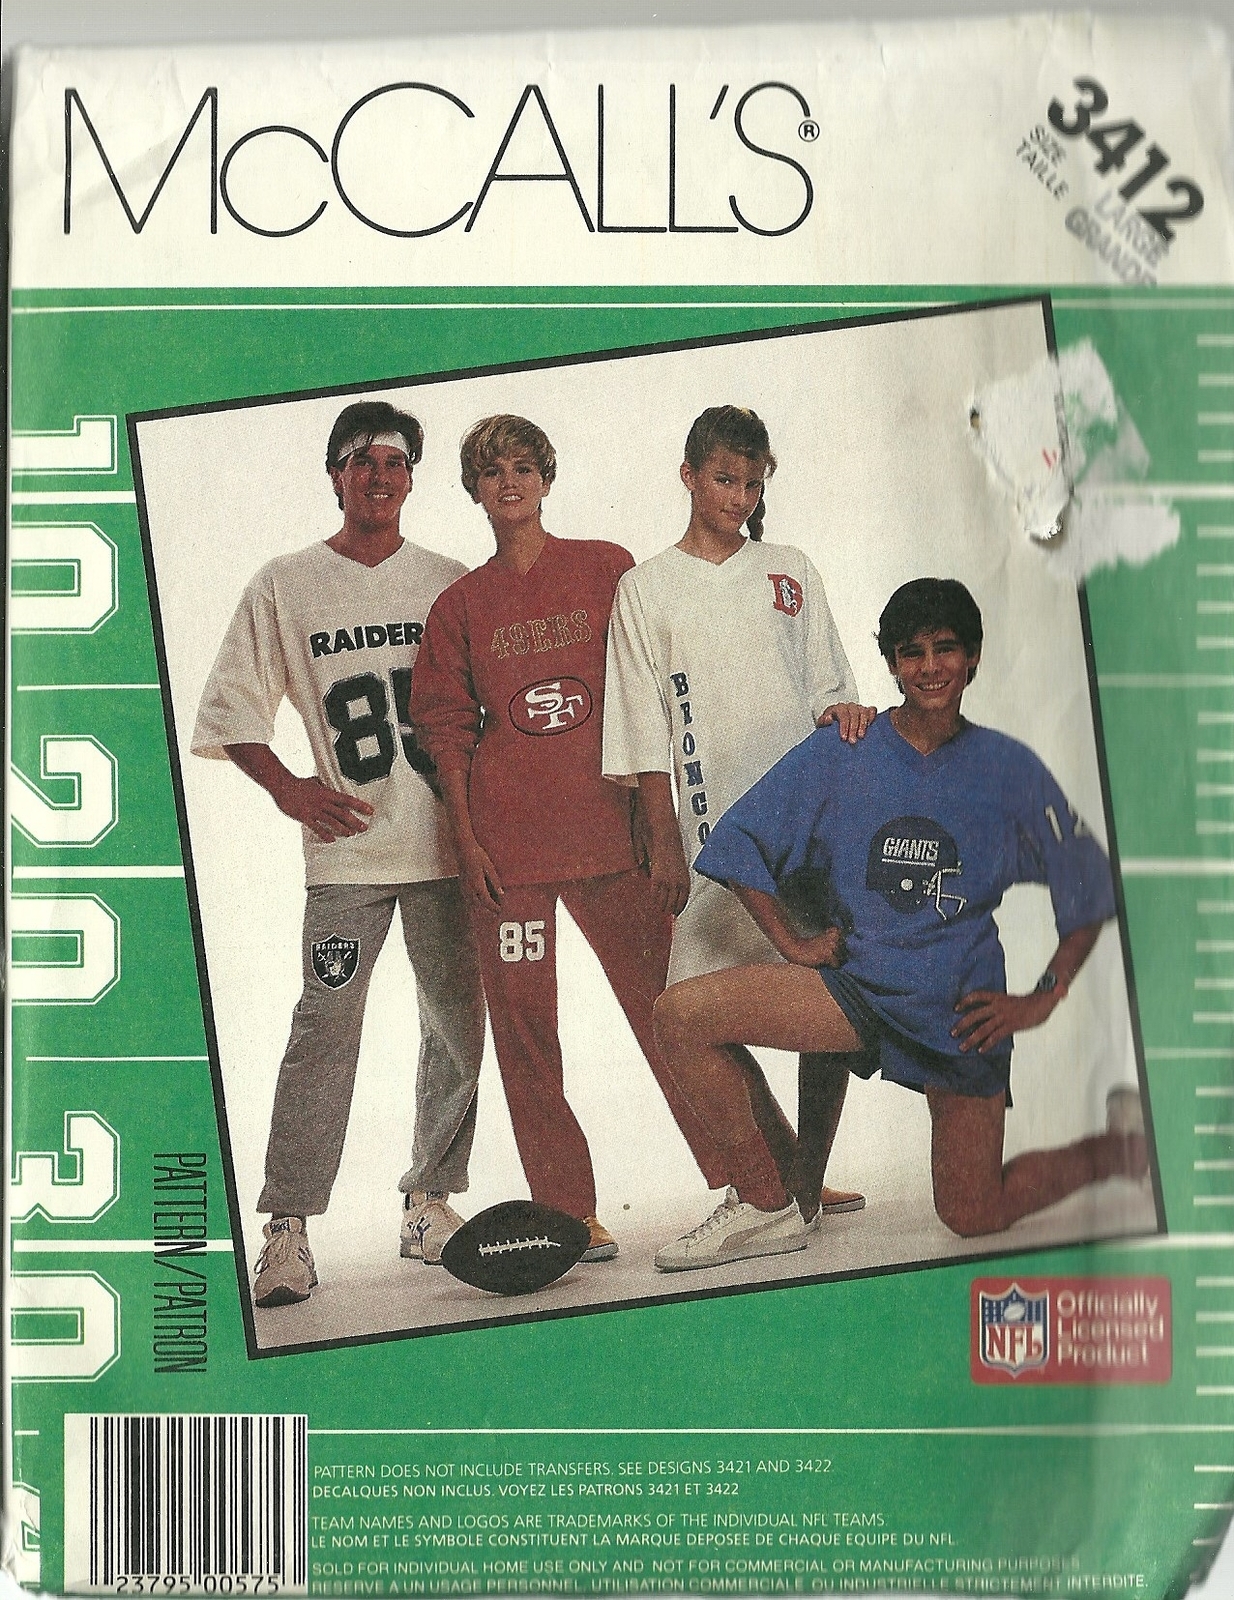 McCall's Sewing Pattern 3412 Unisex NFL Nightshirt Top Pants Shorts Size L New  - $9.99